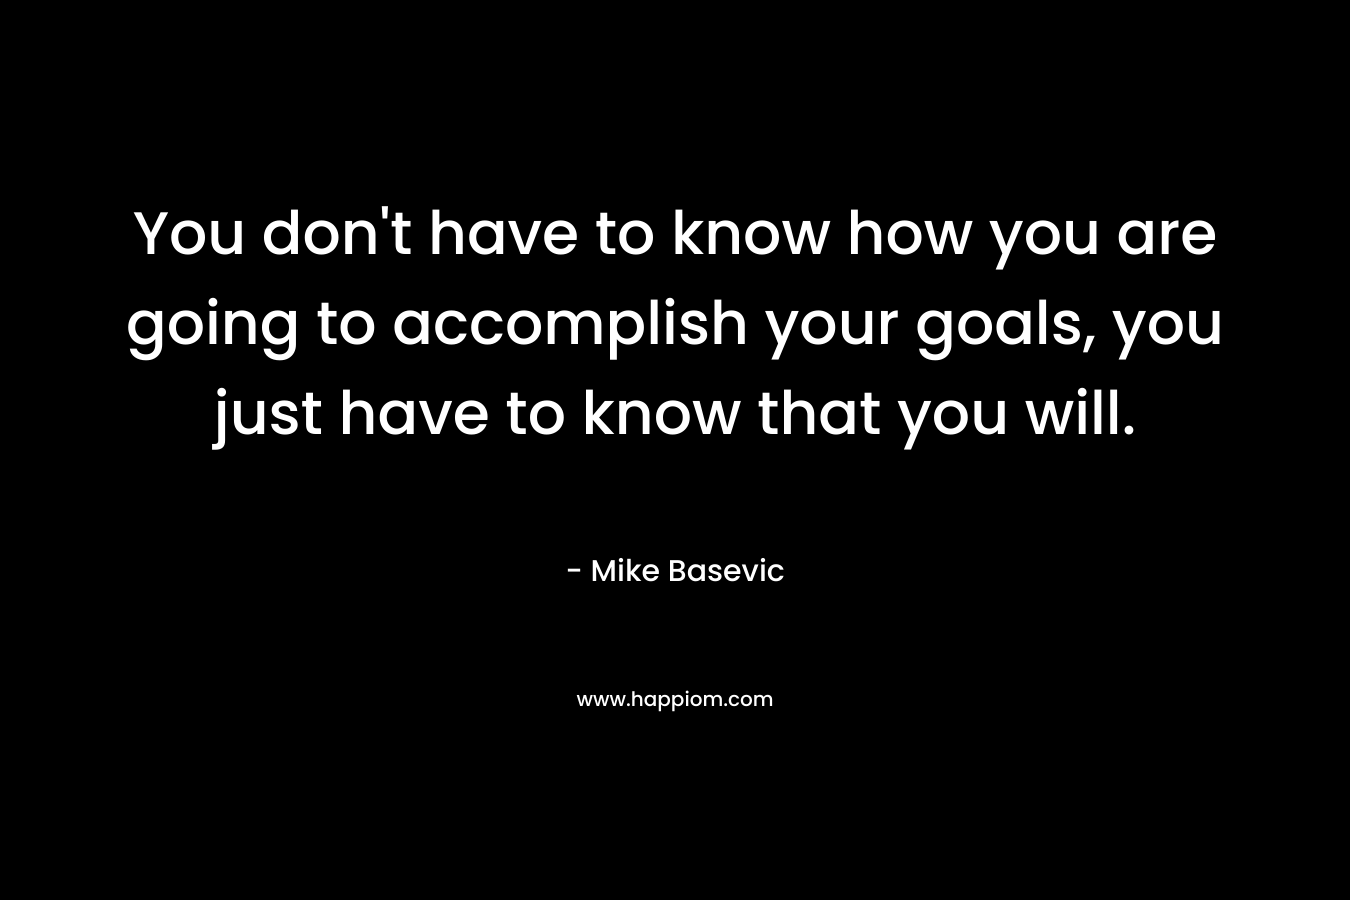 You don't have to know how you are going to accomplish your goals, you just have to know that you will.